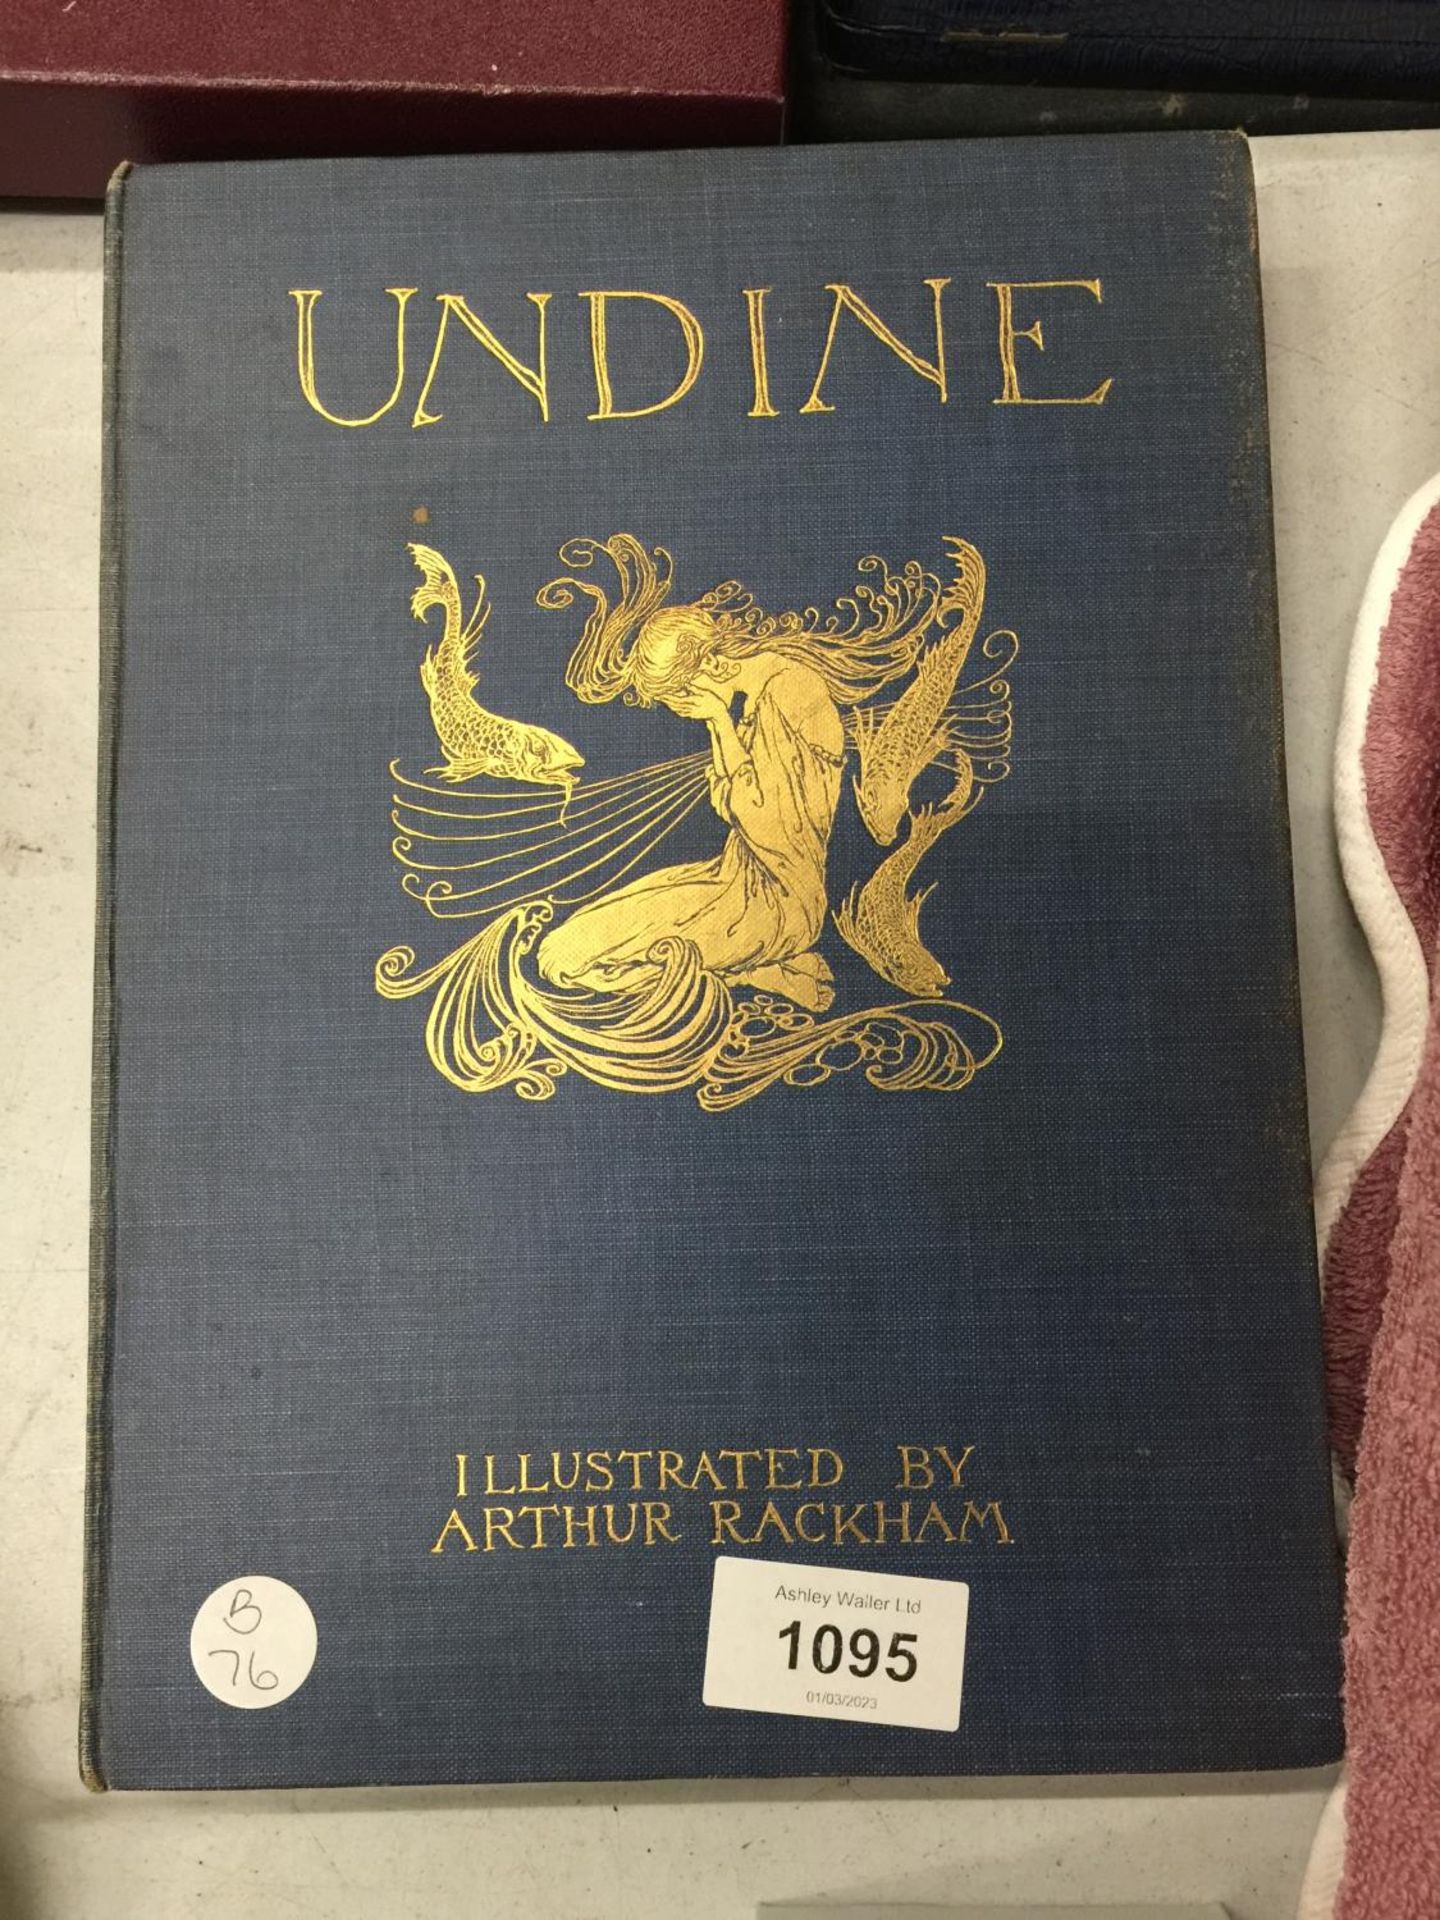 A 1909 FIRST EDITION BOOK 'UNDINE' ILLUSTRATED BY ARTHUR RACKHAM - Image 2 of 6